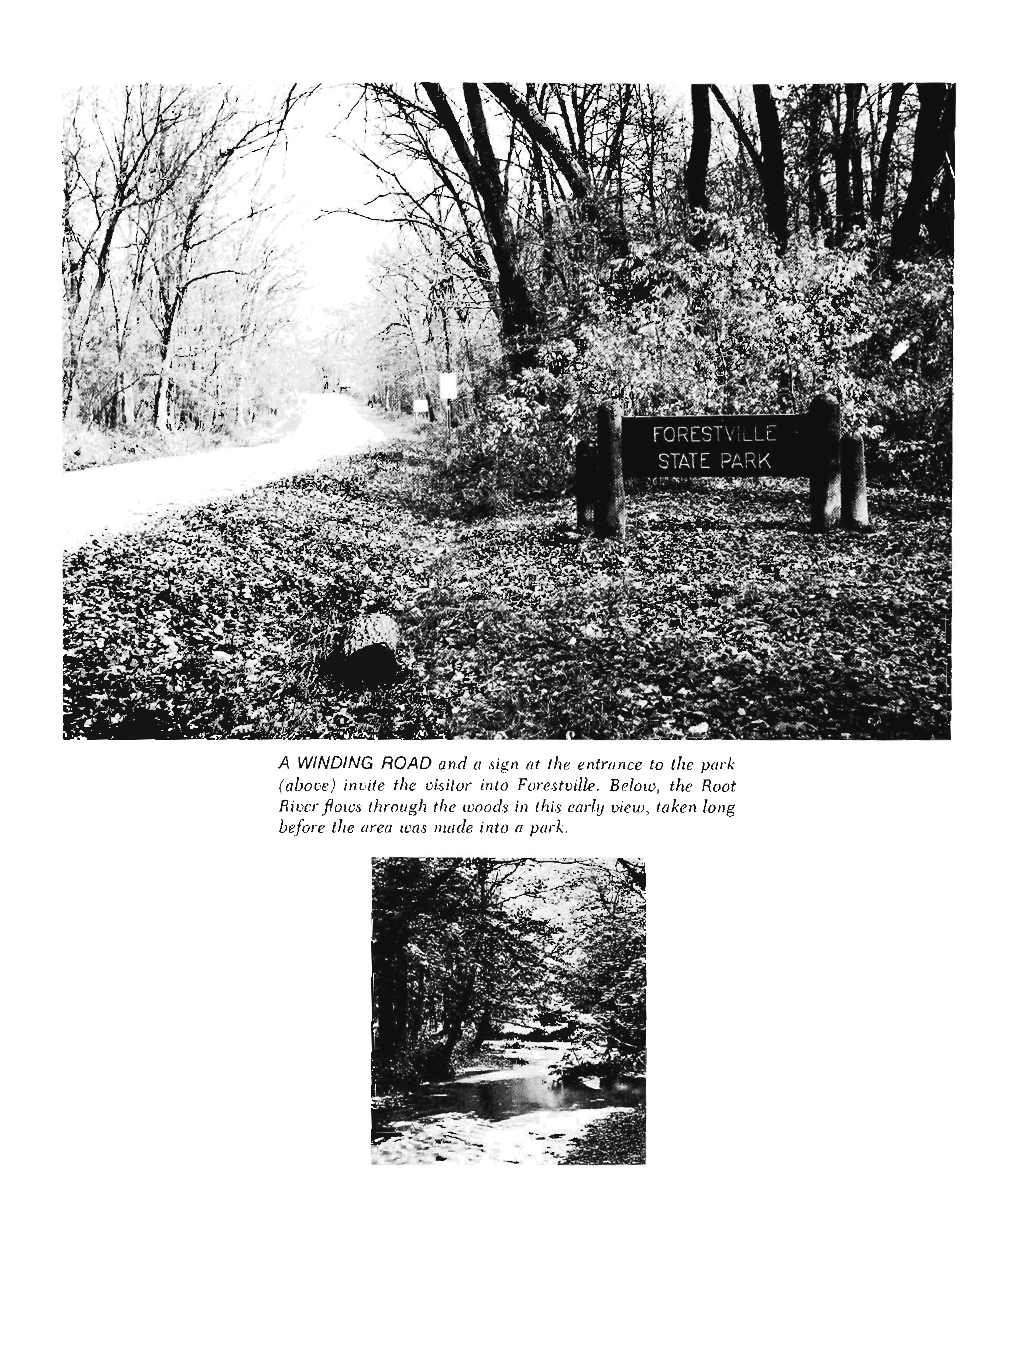 Forestville, the Making of a State Park / Roy W. Meyer